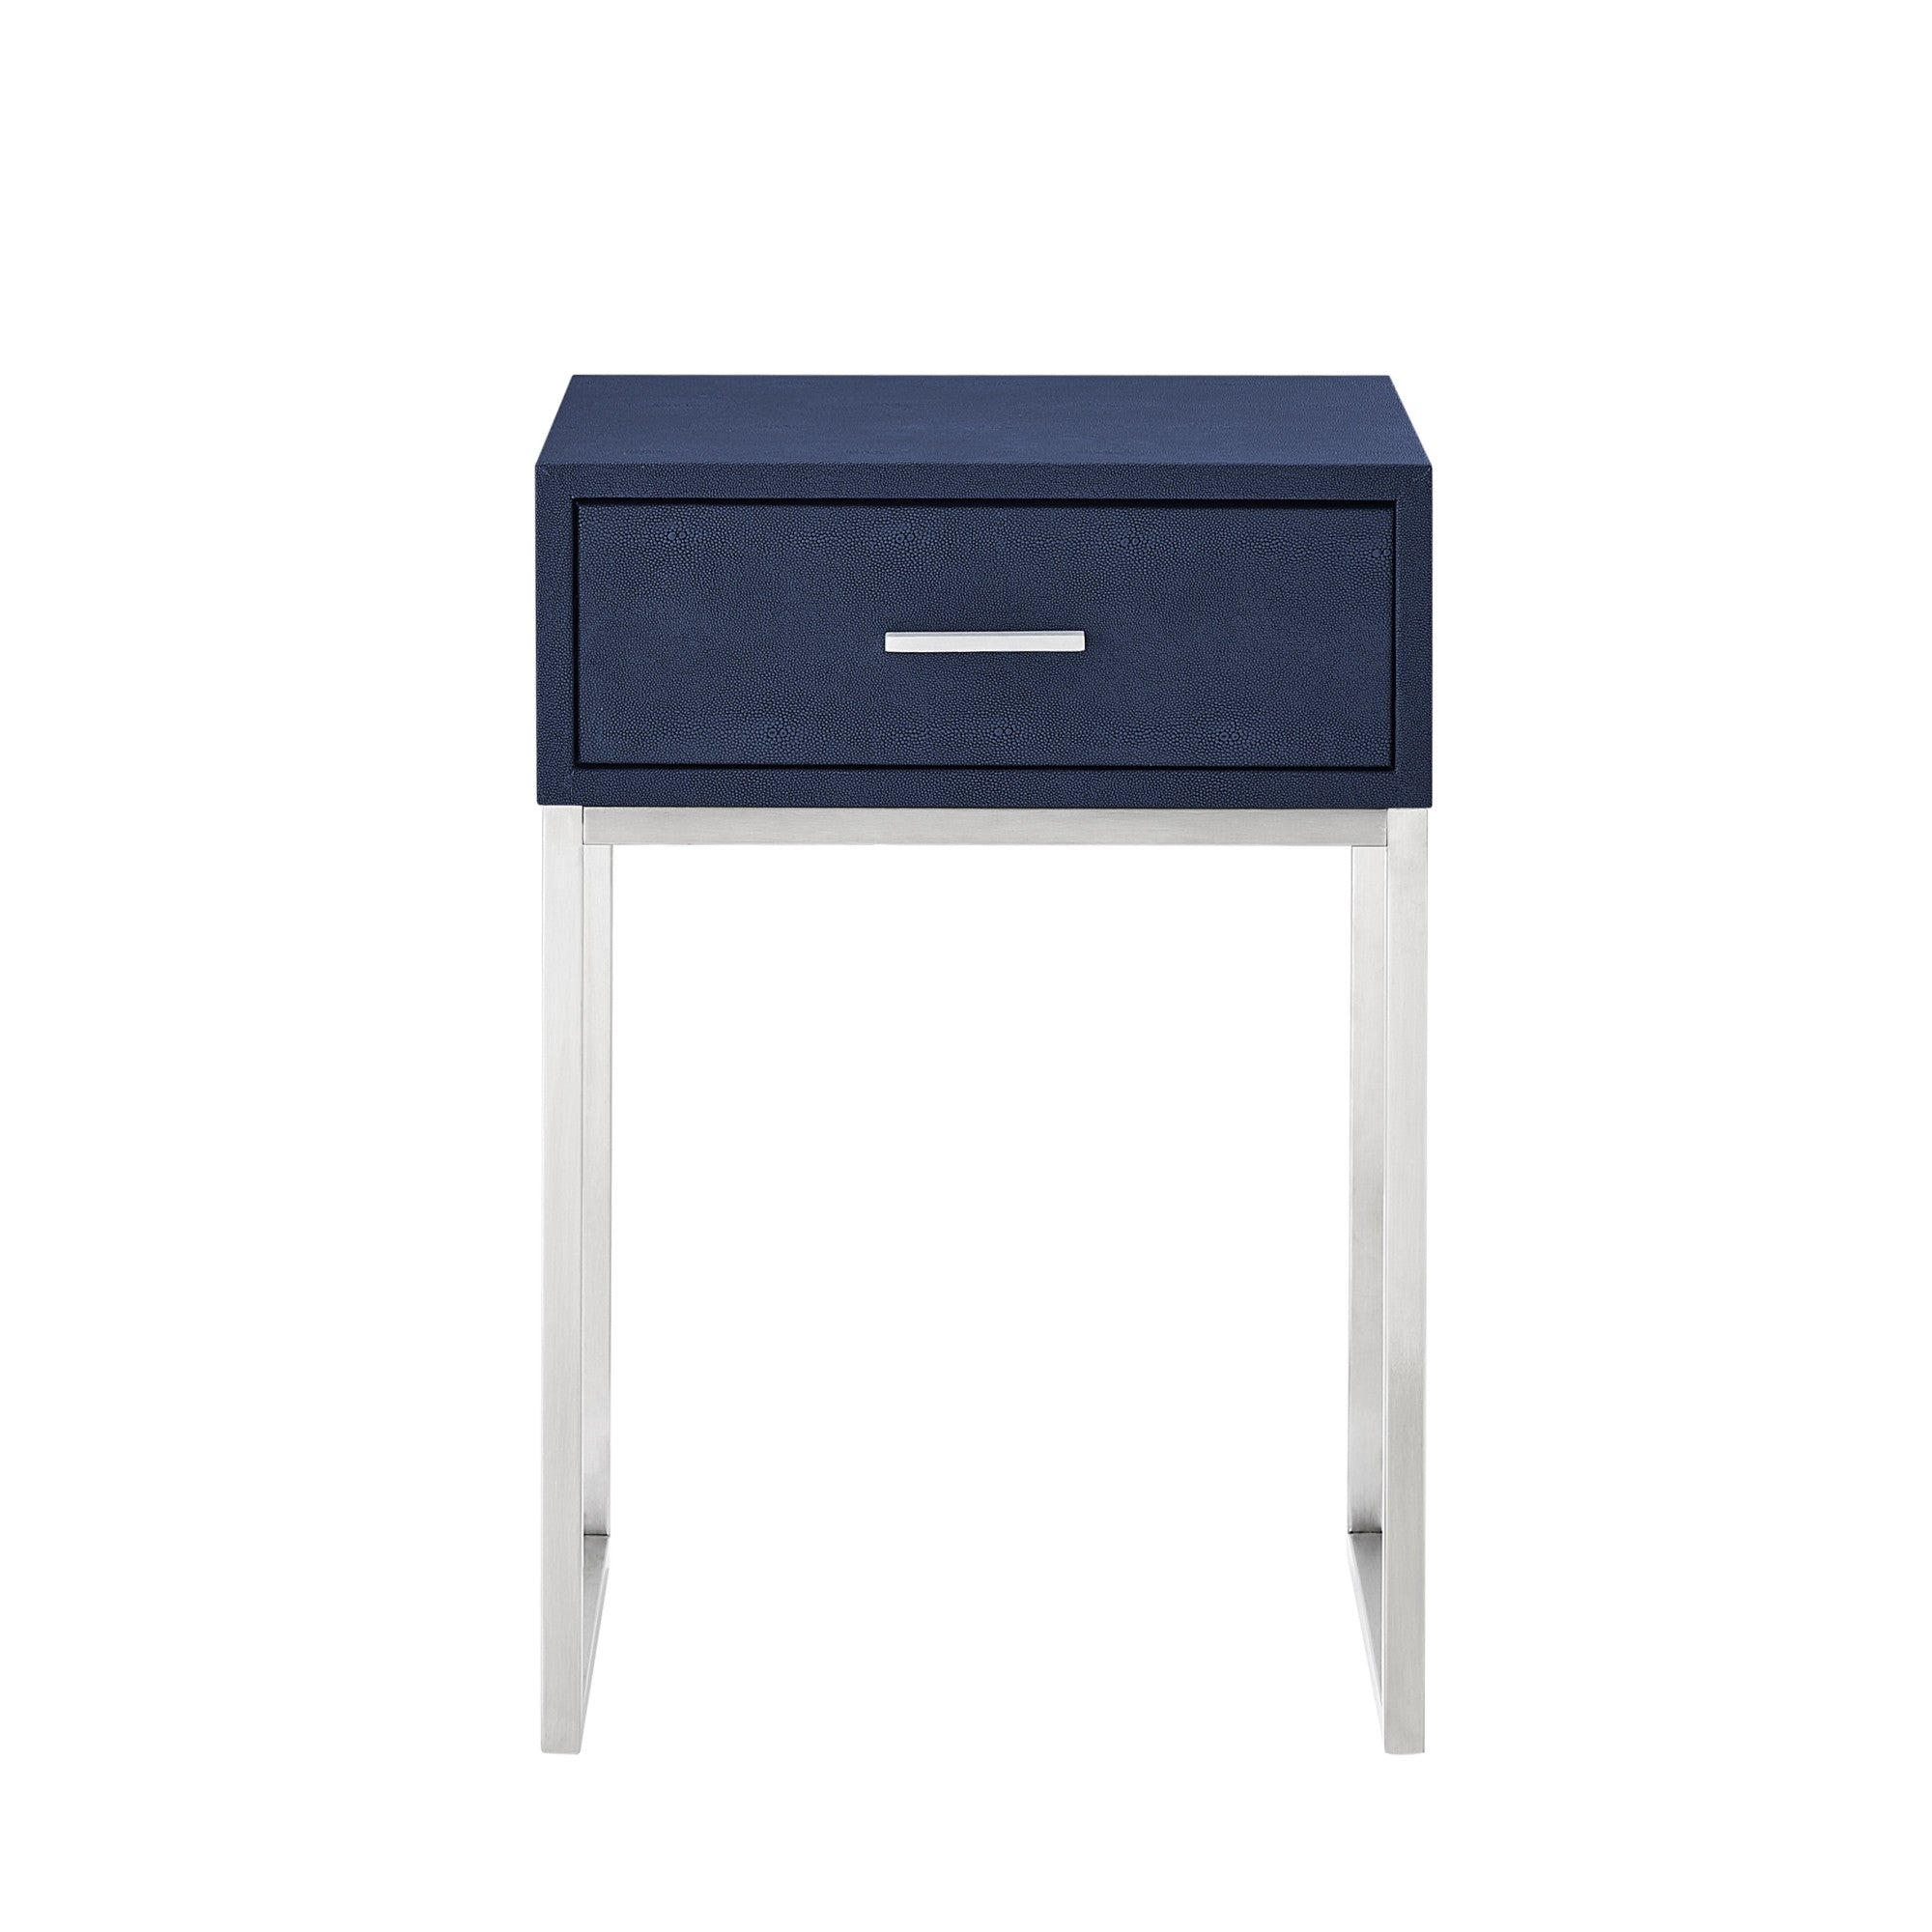 24" Silver Metallic and Navy Blue End Table with Drawer